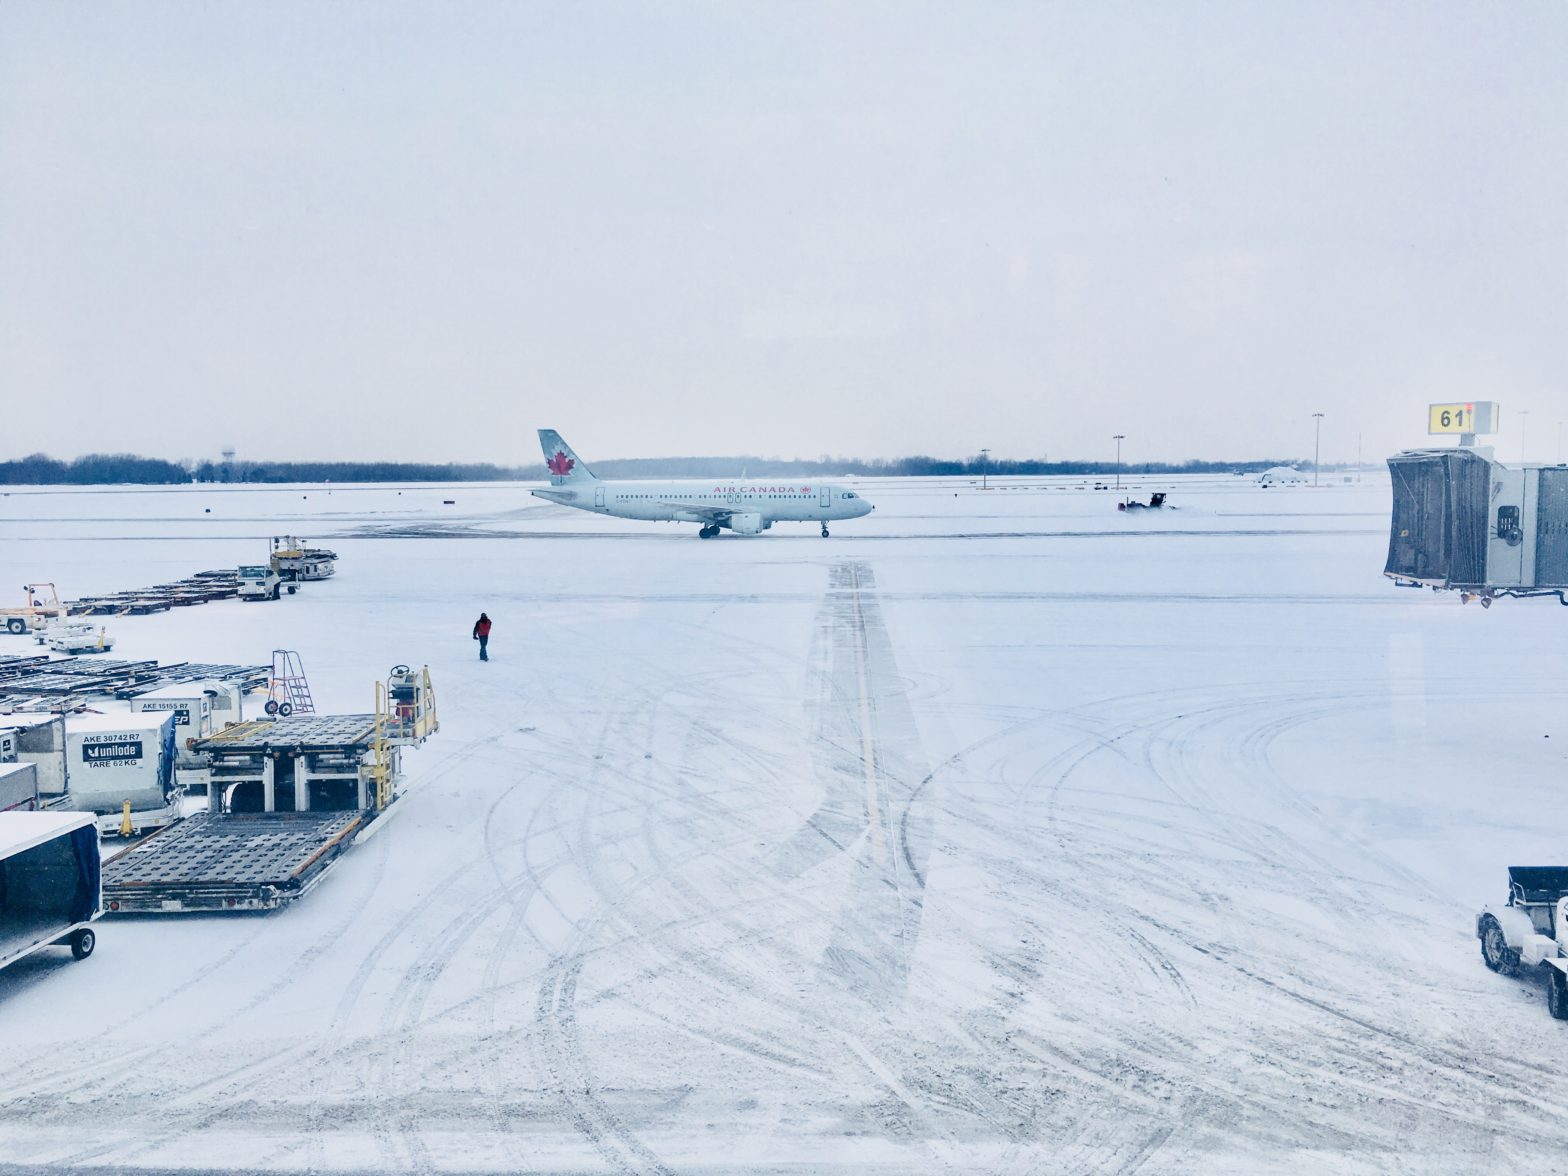 More Flight Cancellations Predicted As Winter Storms Move Over U.S.